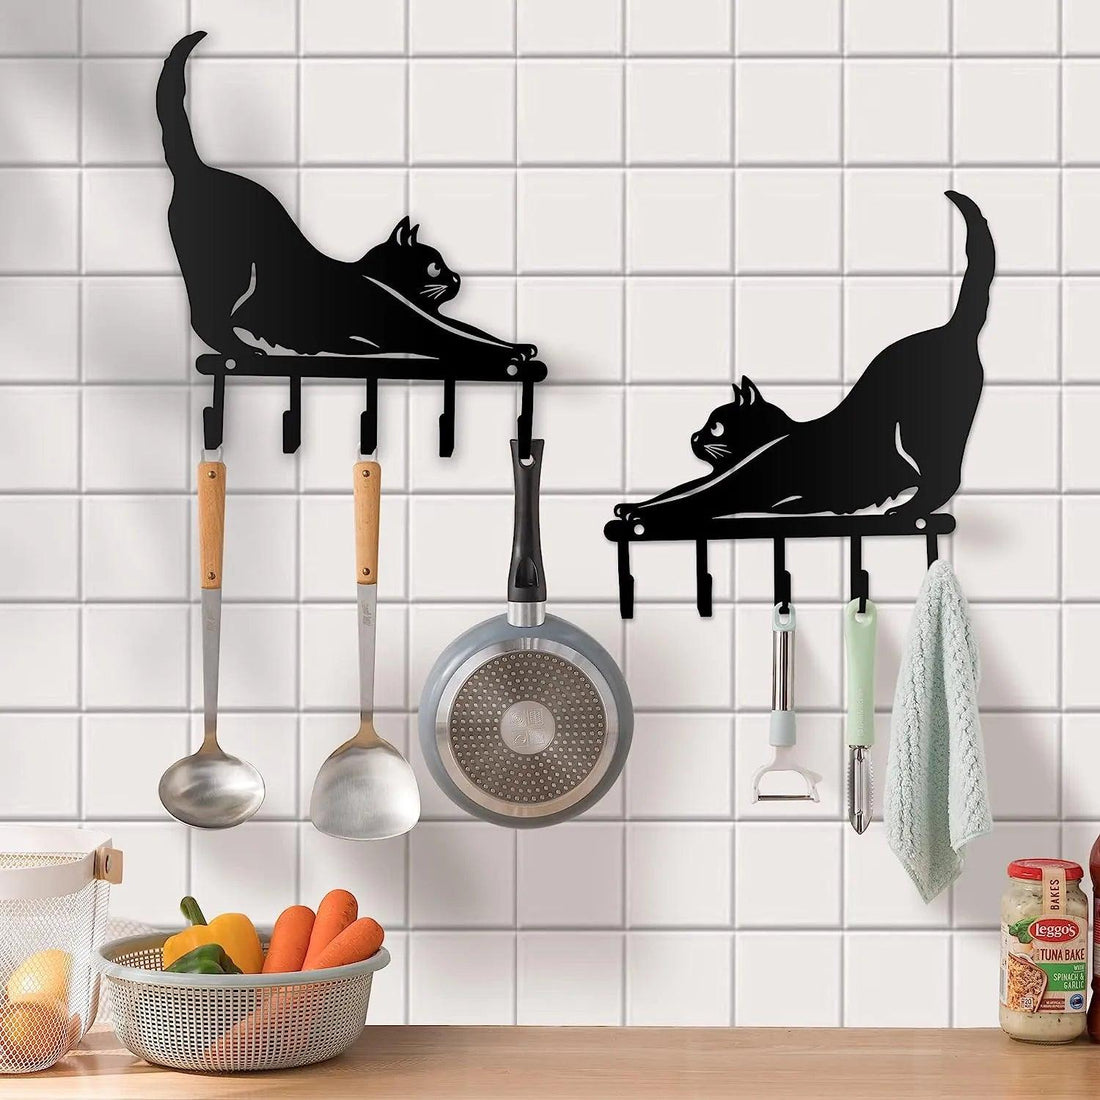 Metal Black Cat Hook Rack - Just Cats - Gifts for Cat Lovers